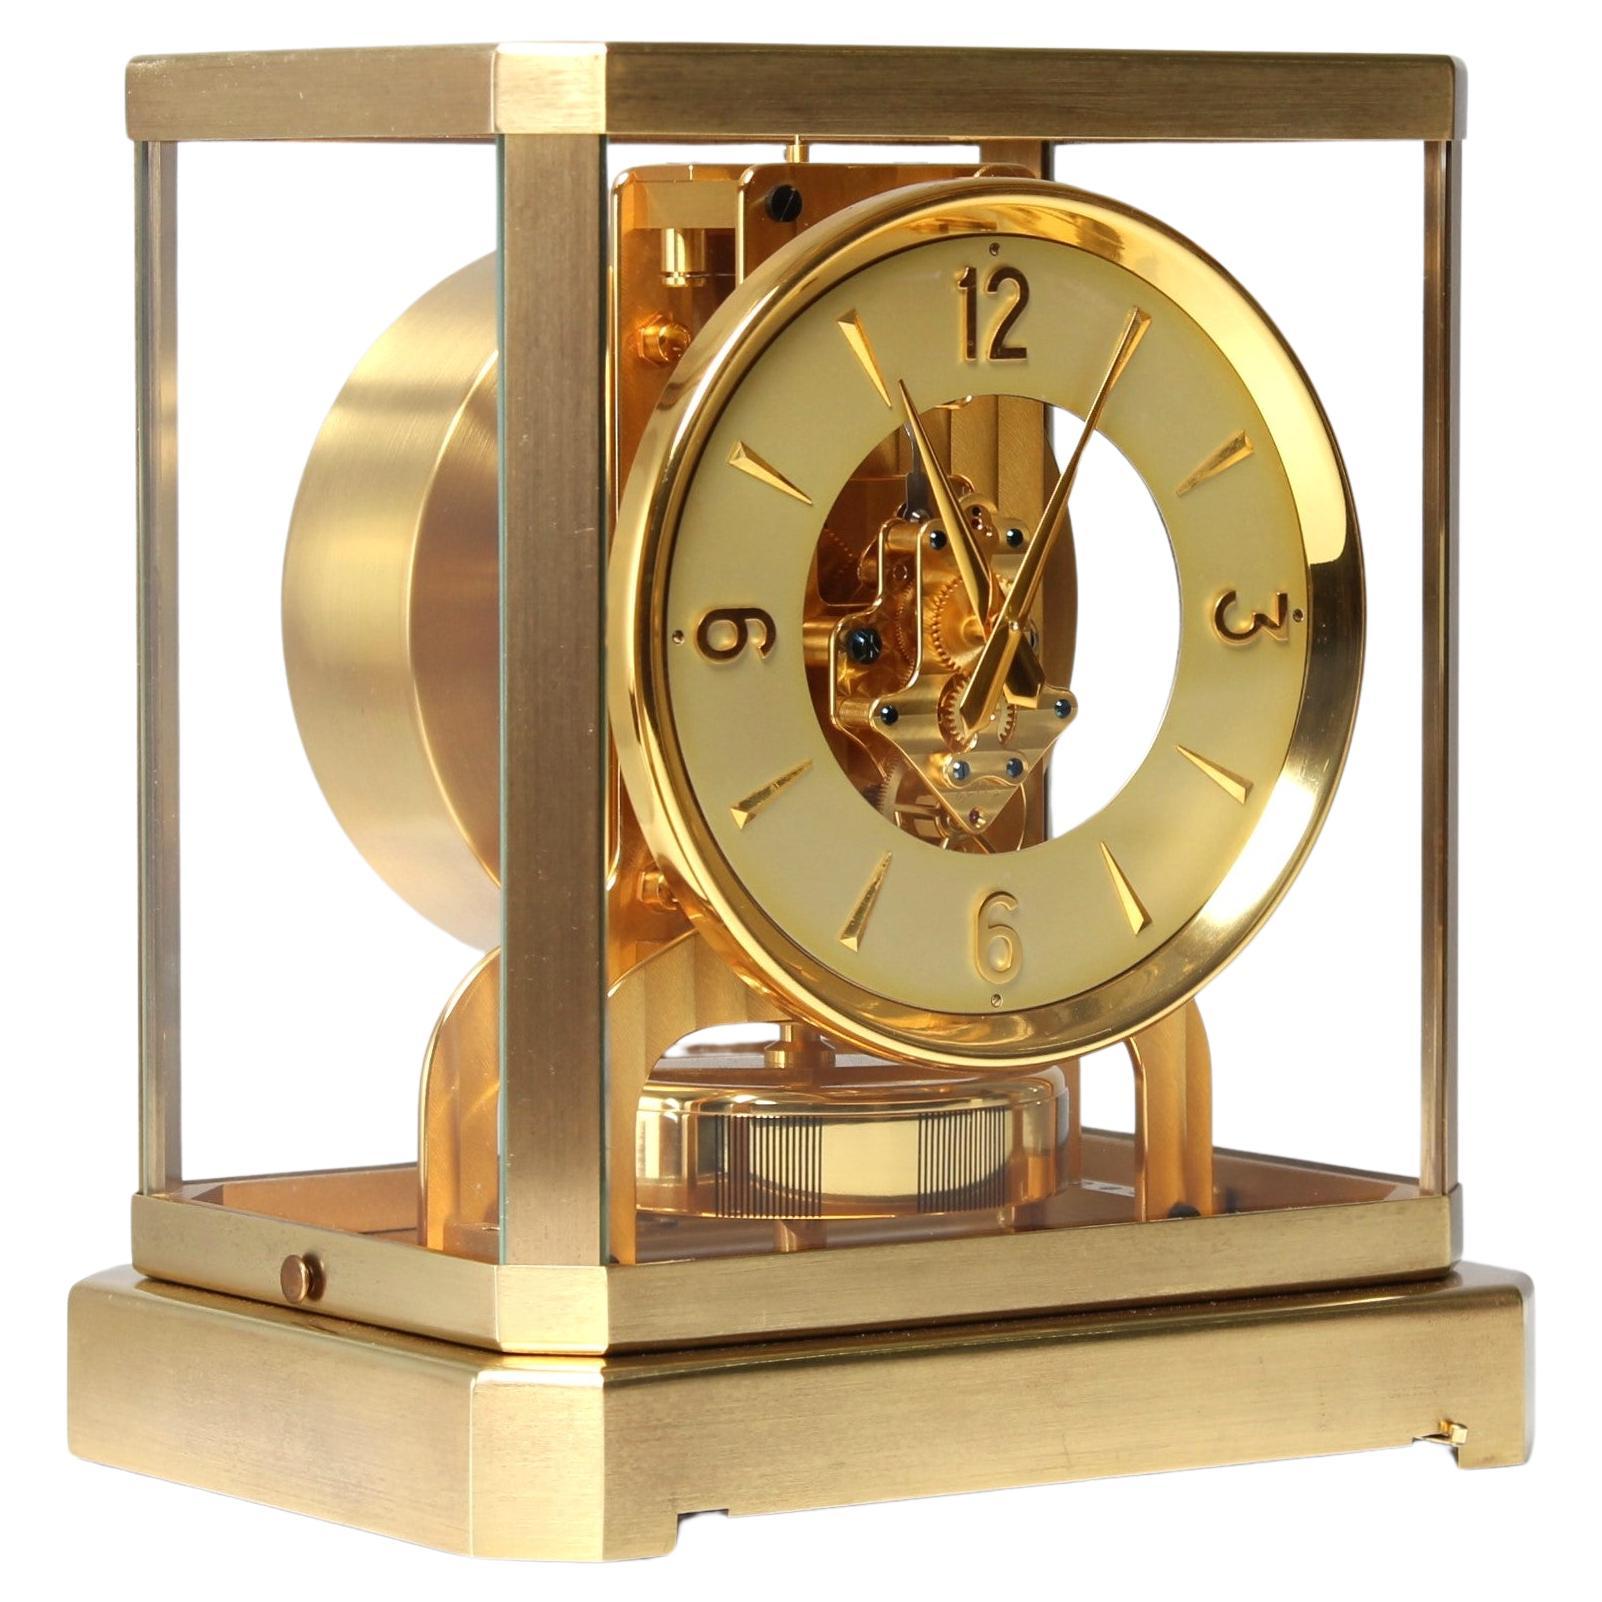 Atmos Clock by Jaeger LeCoultre, Classique Design, Manufactured in 1950 For Sale